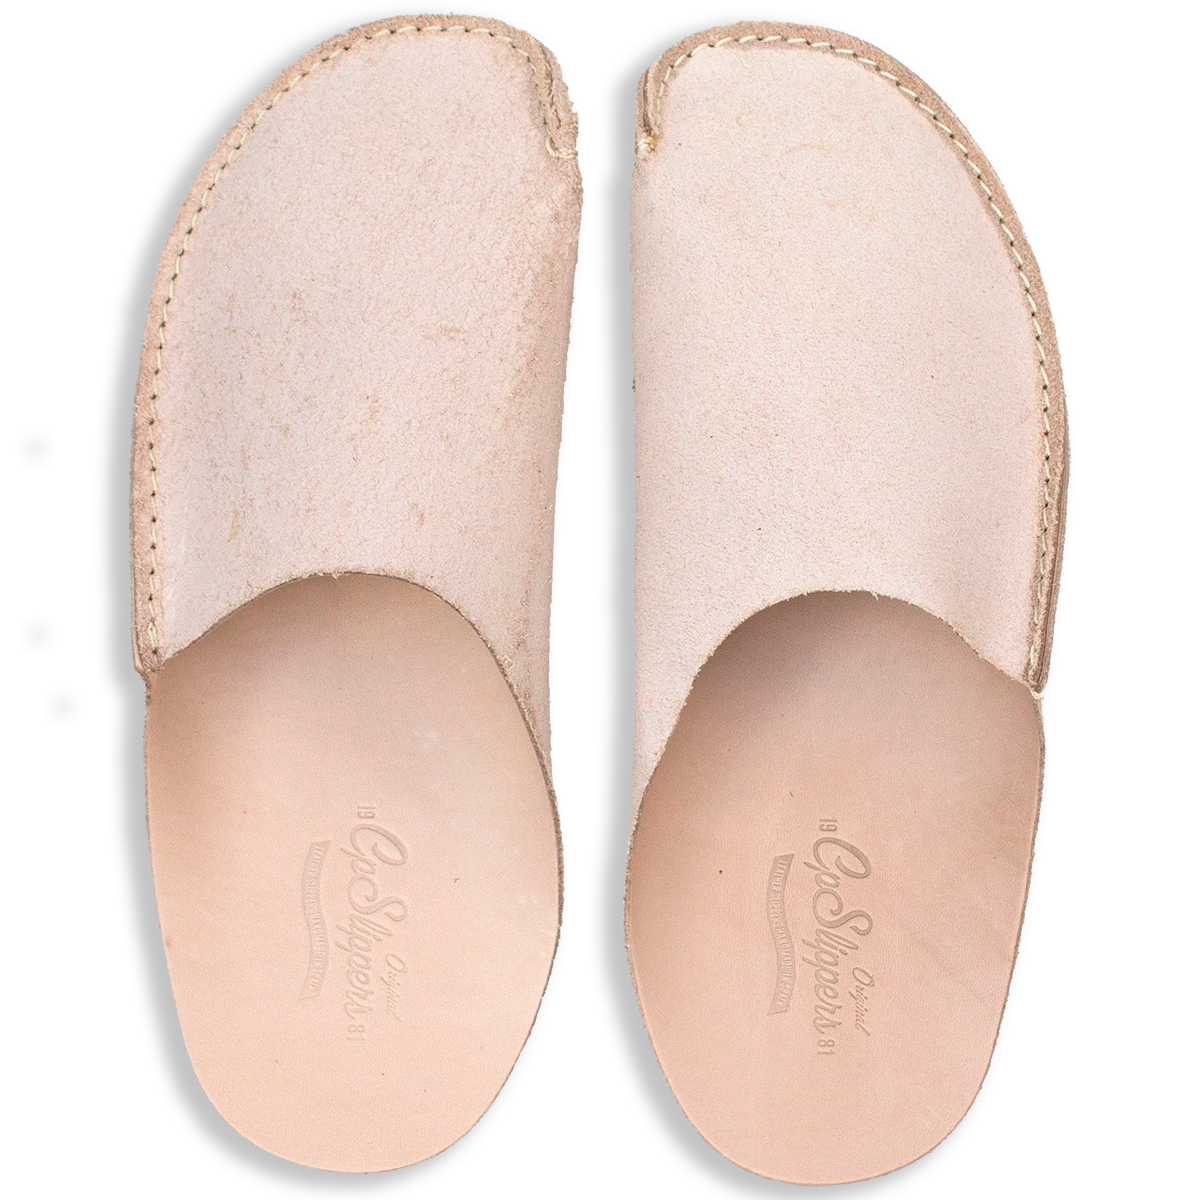 Natural Veg-tan leather slippers home shoes